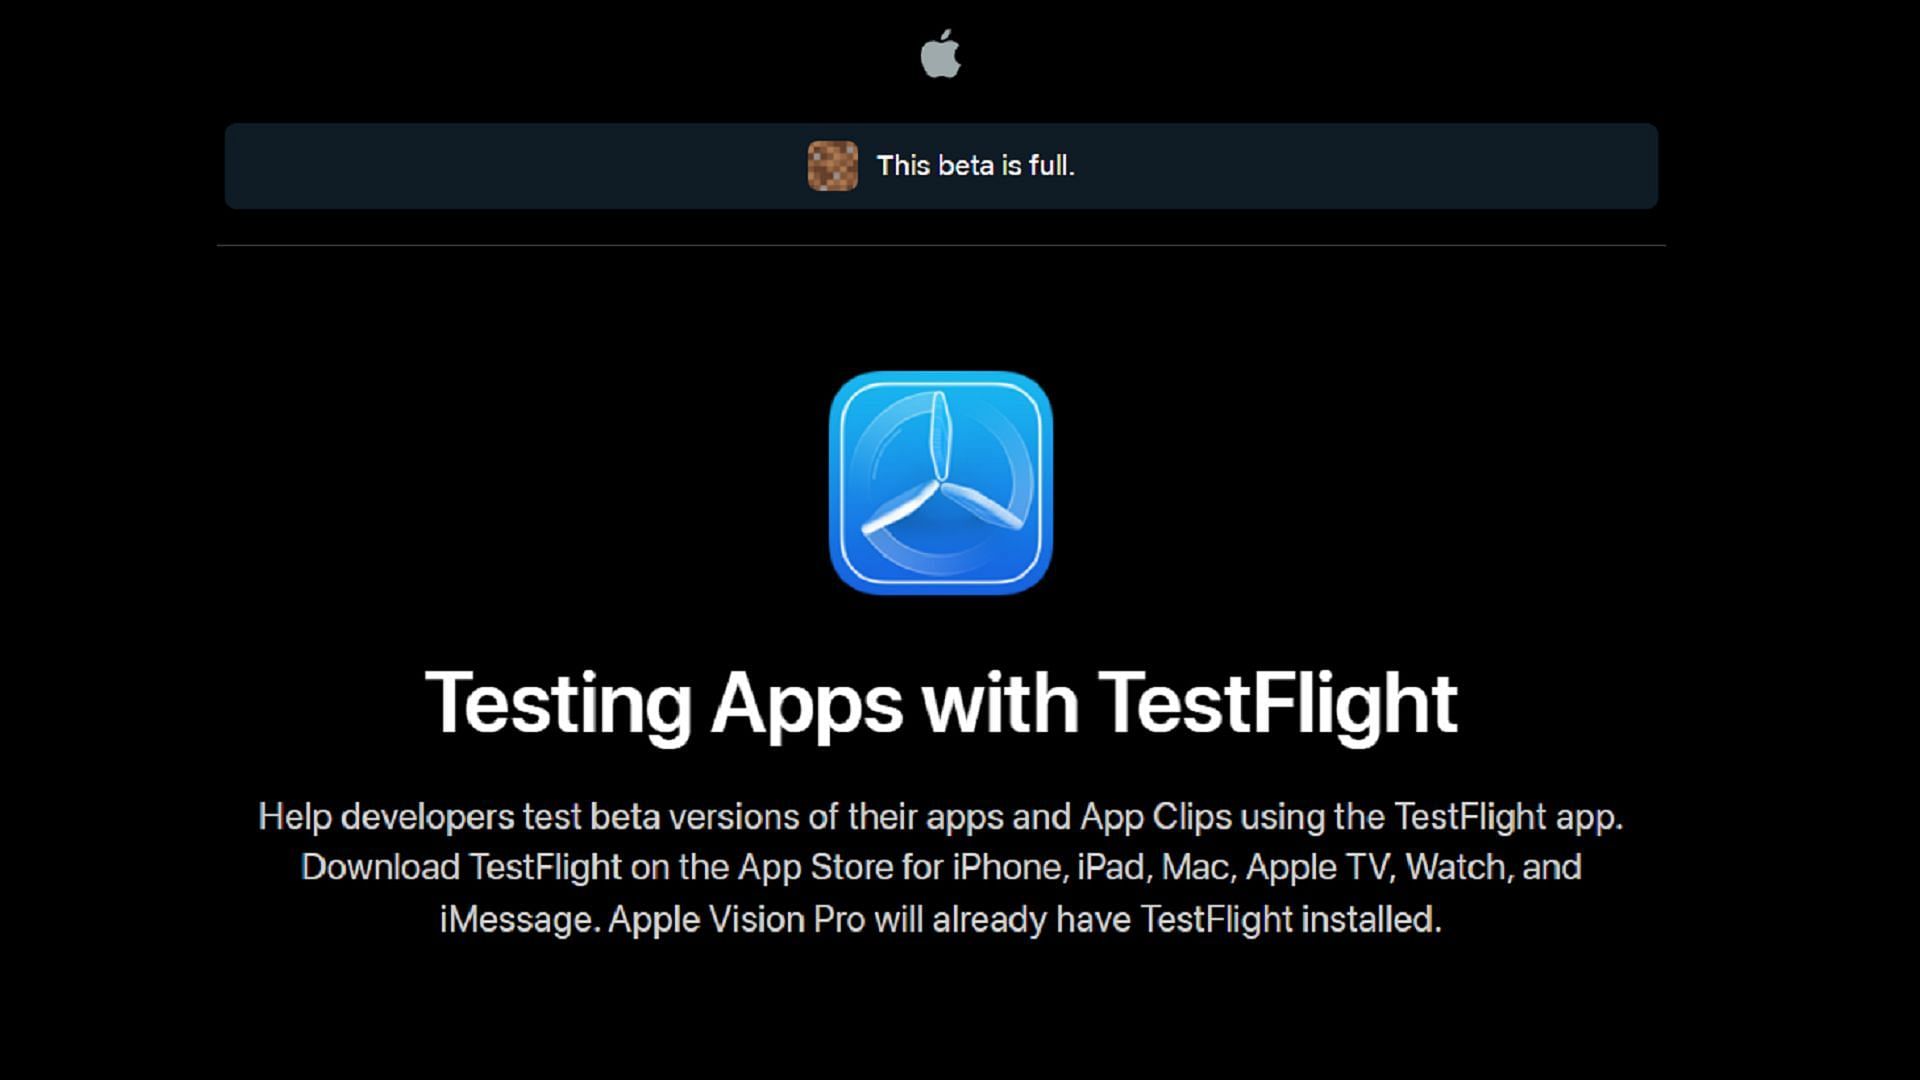 The Apple Testflight signup page for preview signups (Image via Apple)